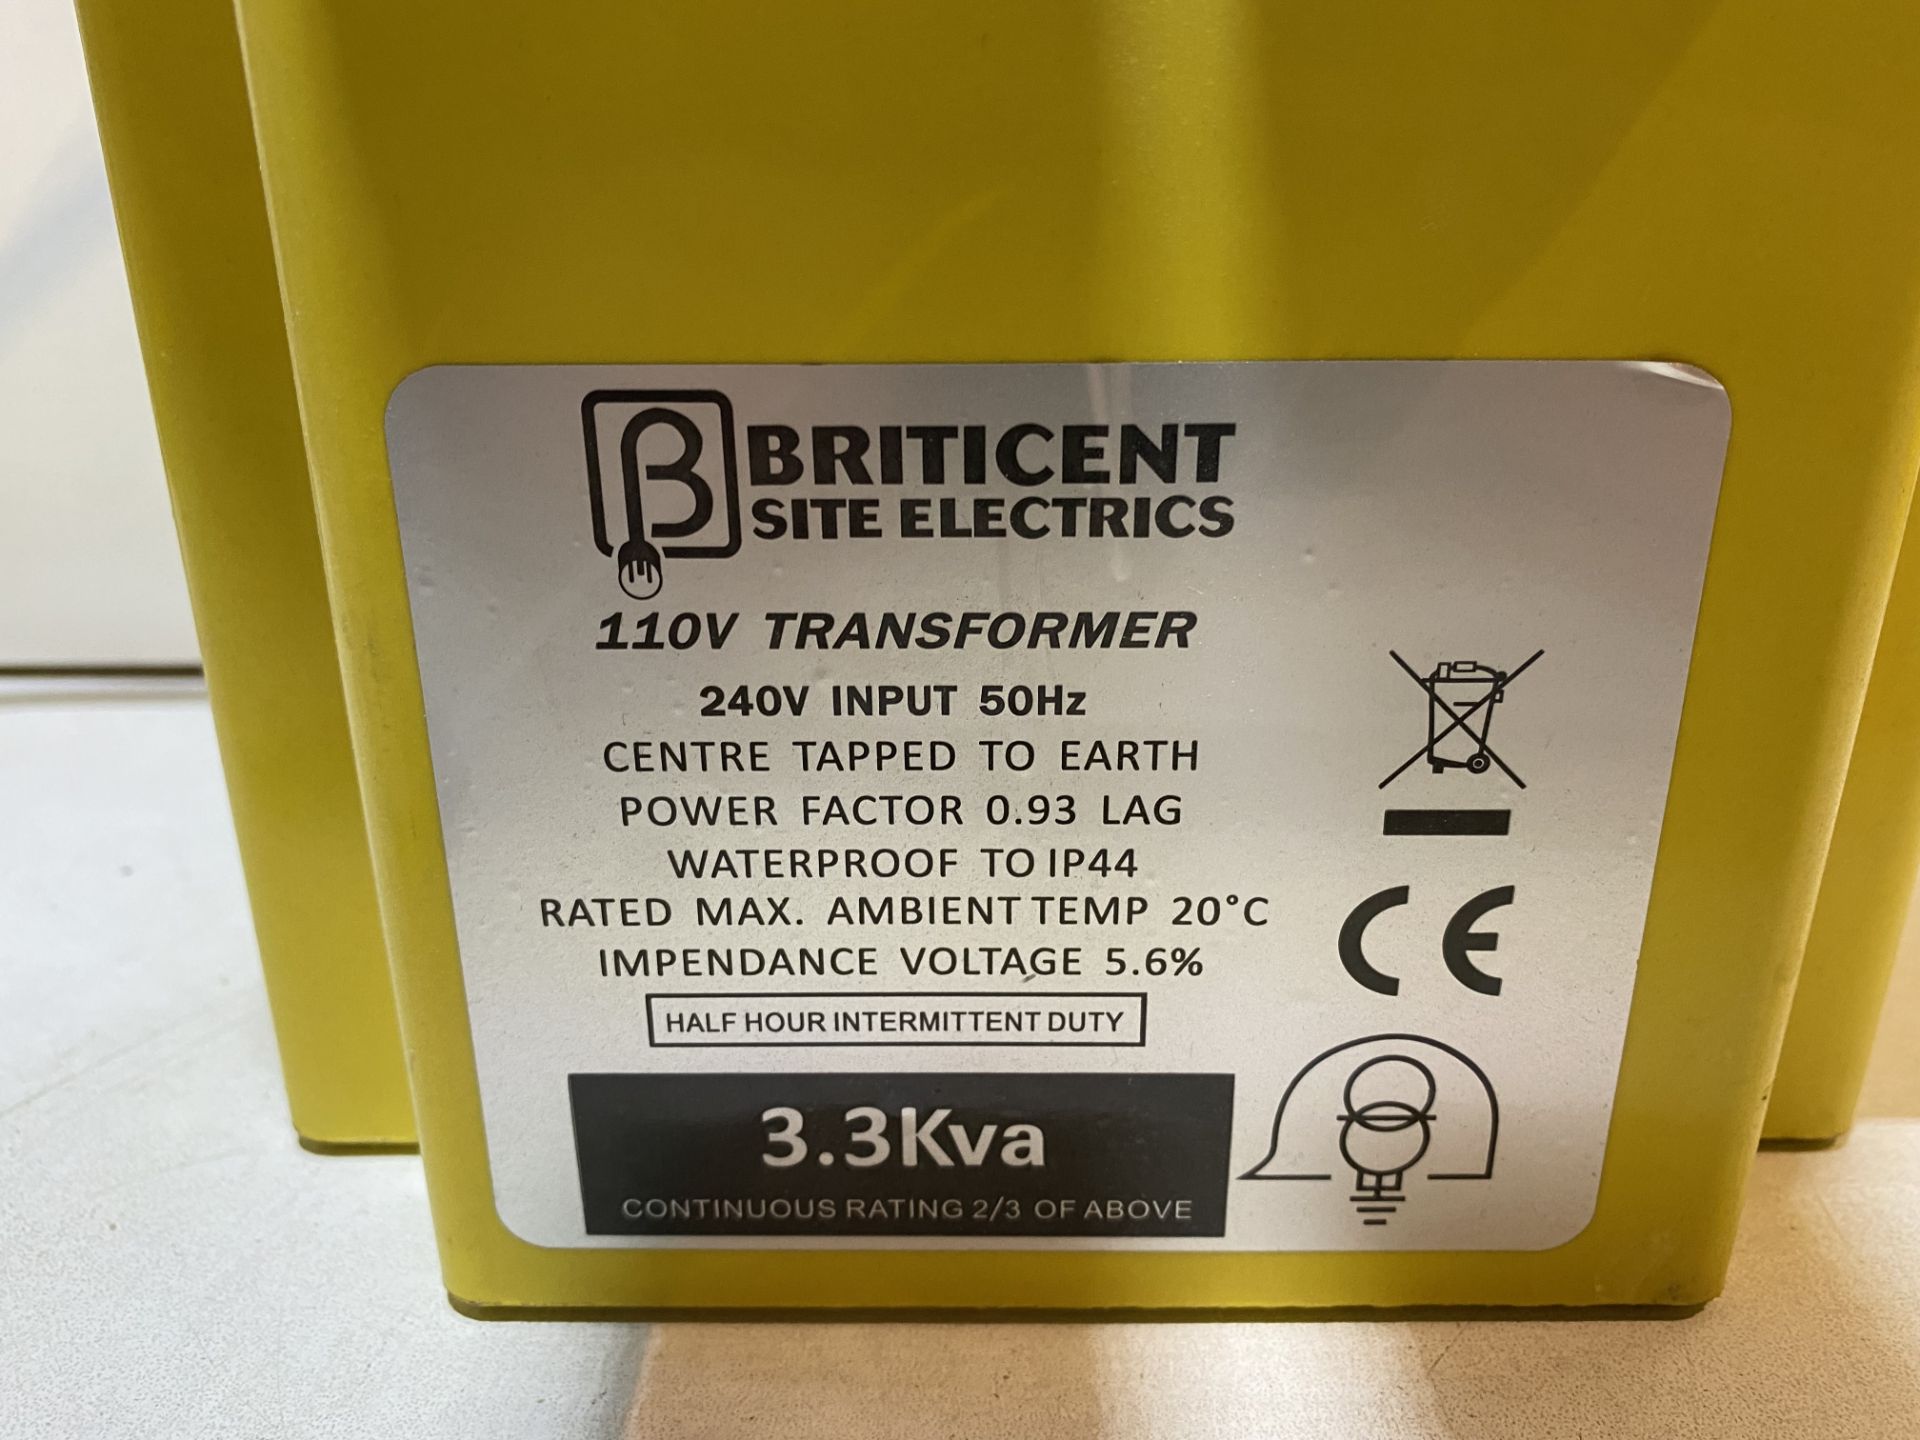 2 x Briticent 110v Transformers, 240v Input - See Pictures - Image 4 of 4